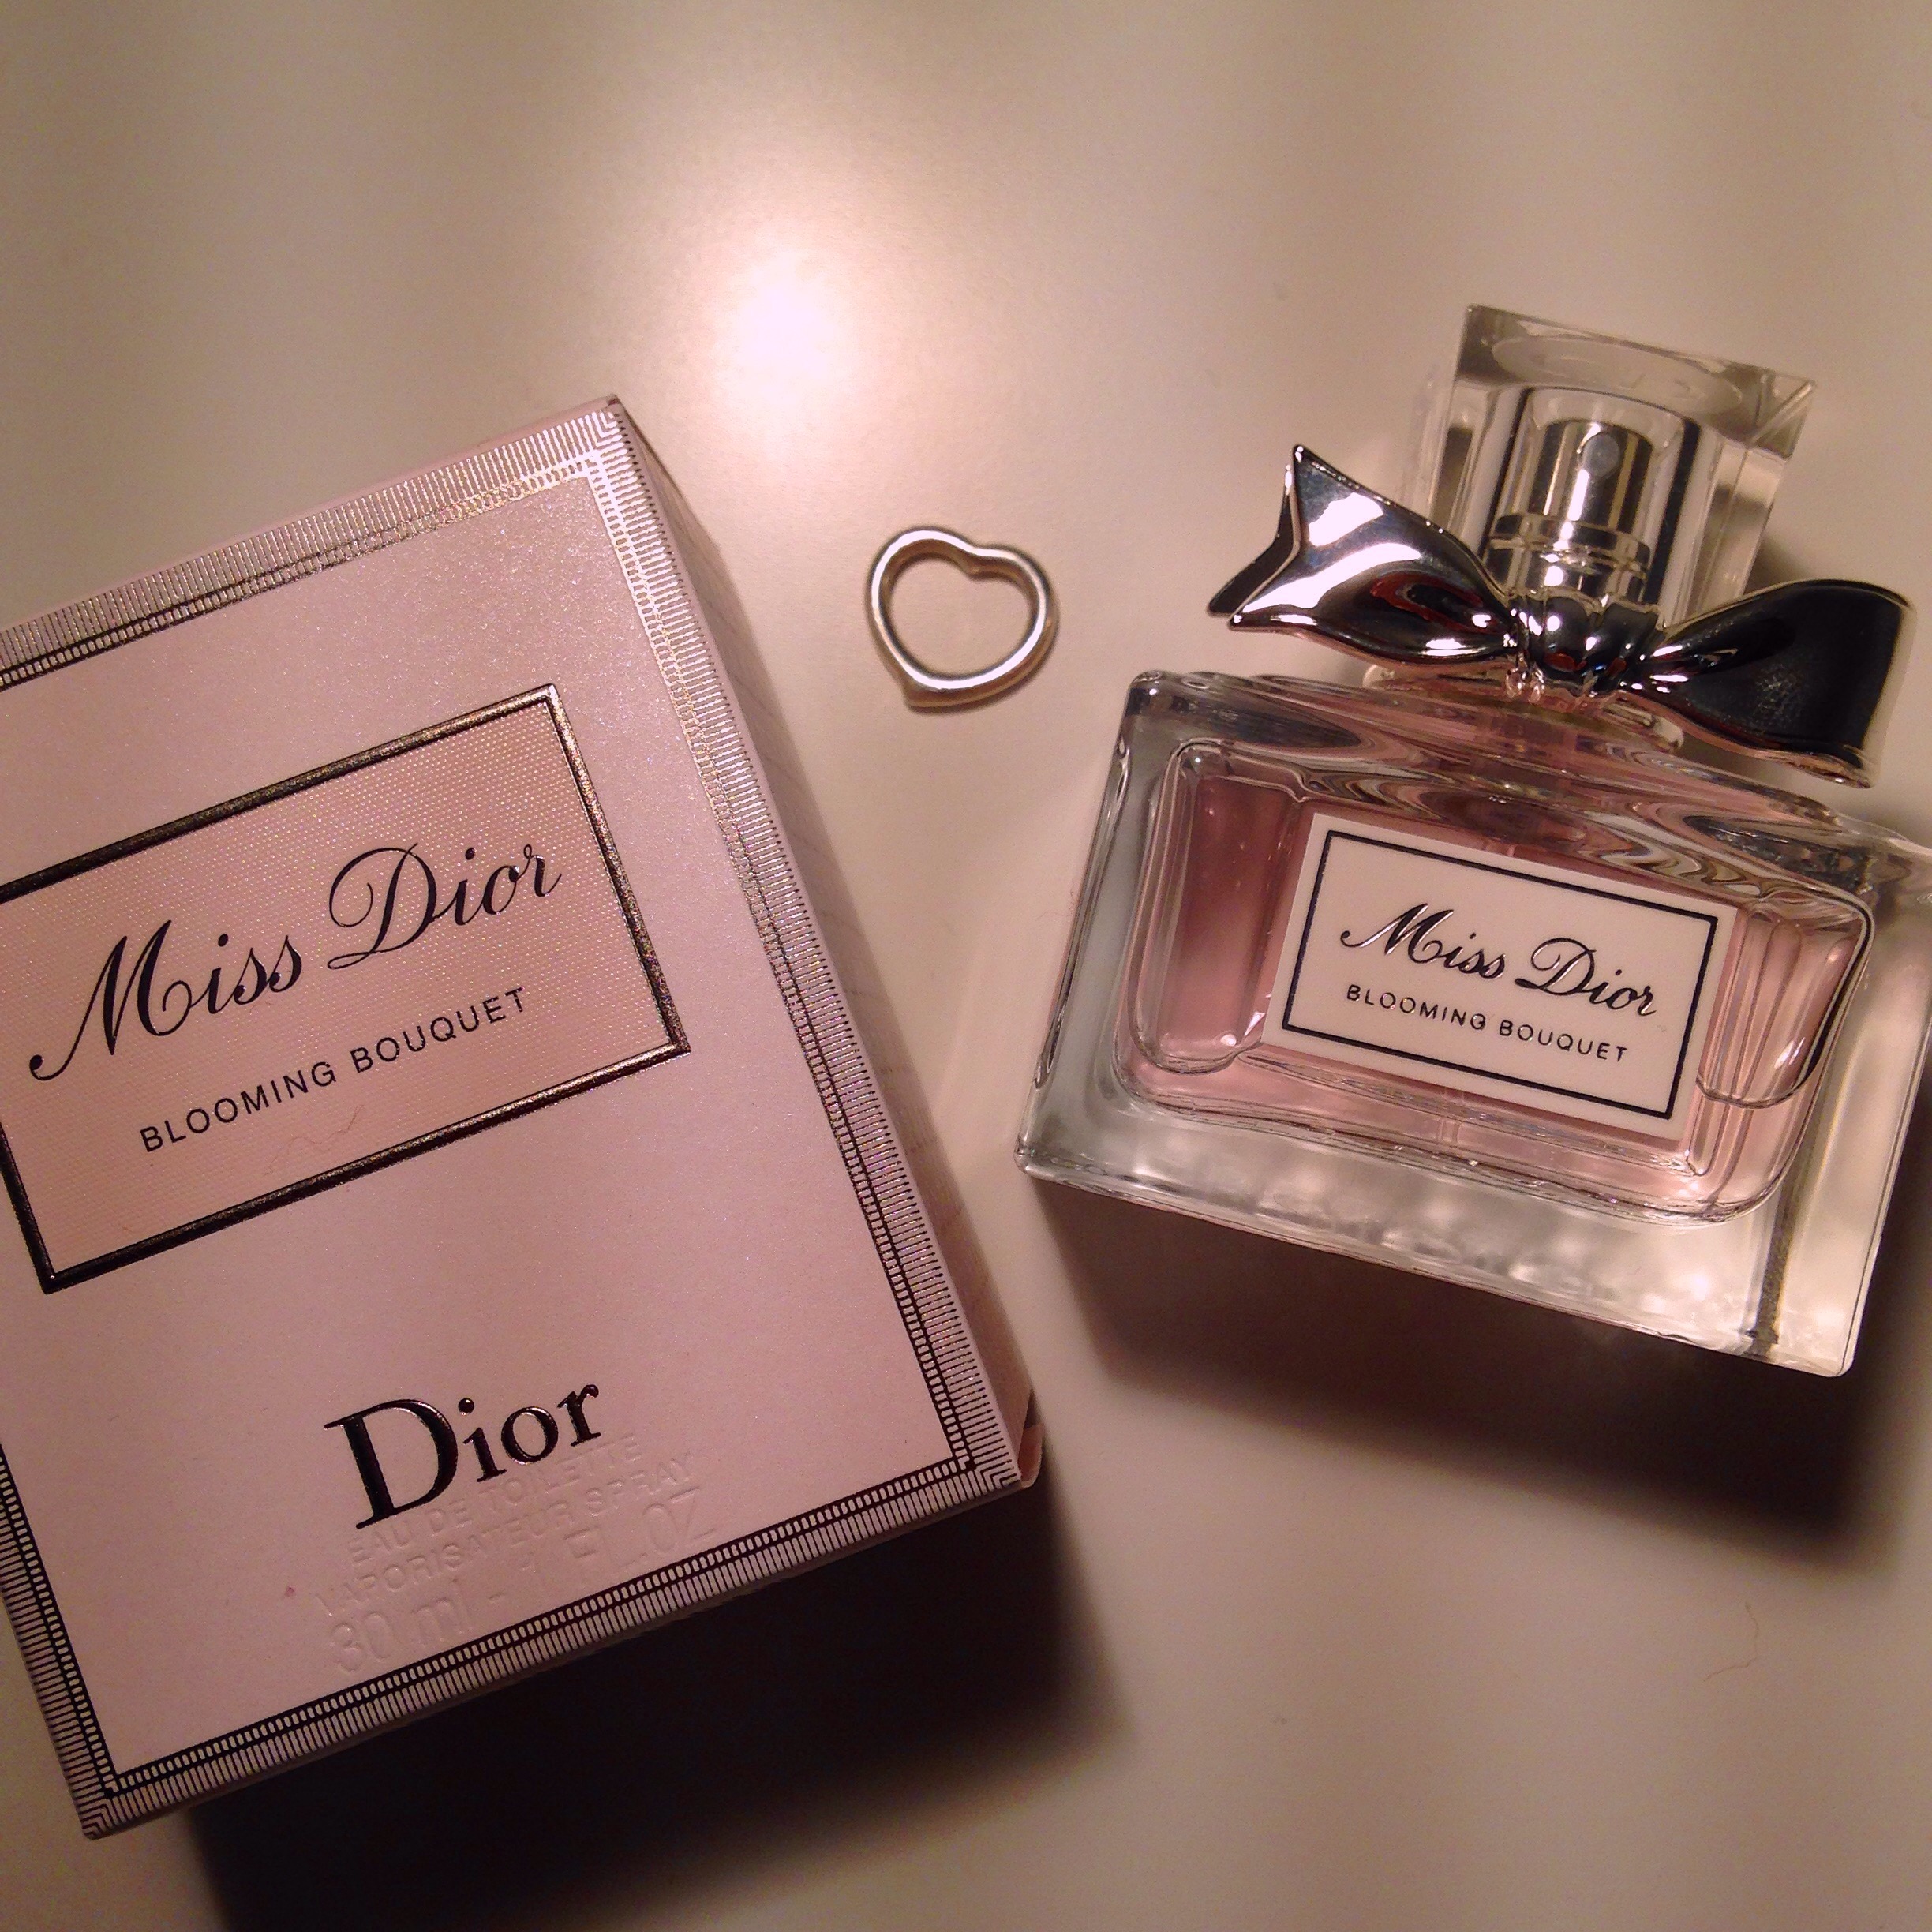 Miss Dior: Blooming Bouquet – My 